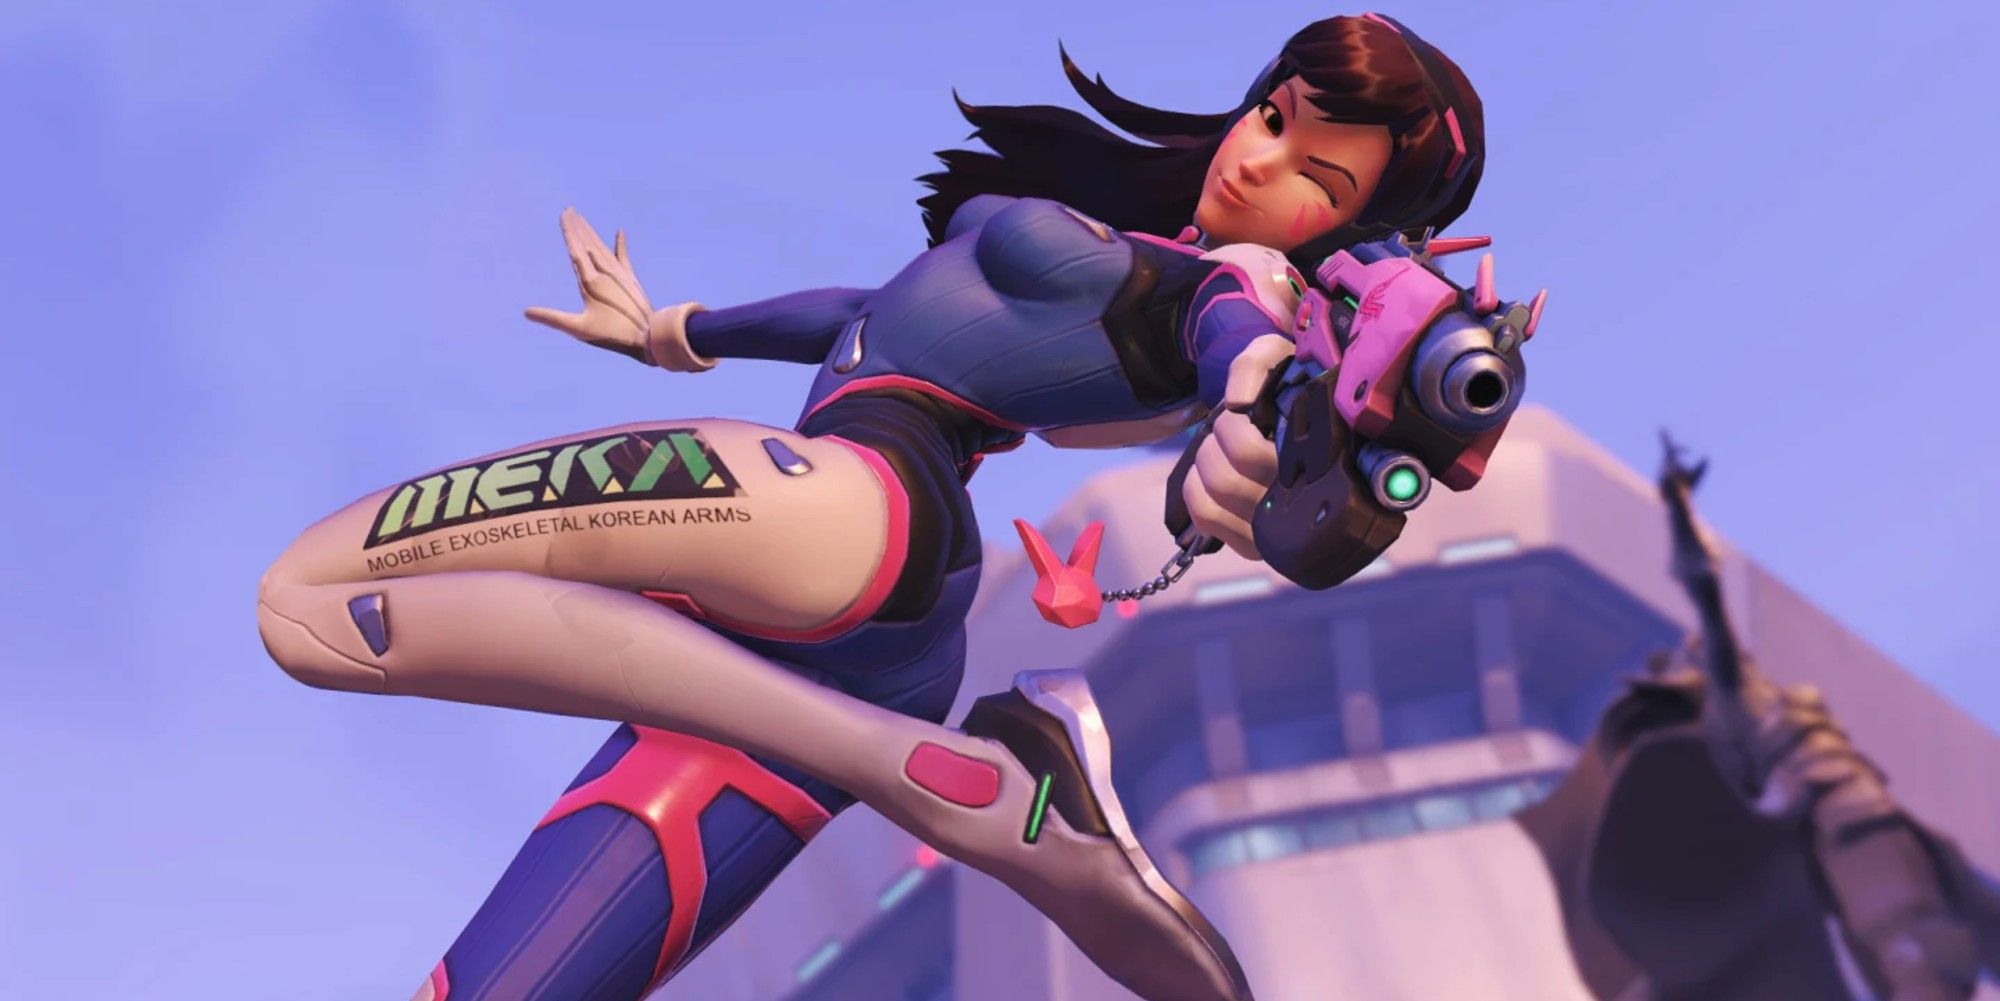 Overwatch 2 comes to Steam next month, more Blizzard games on the way